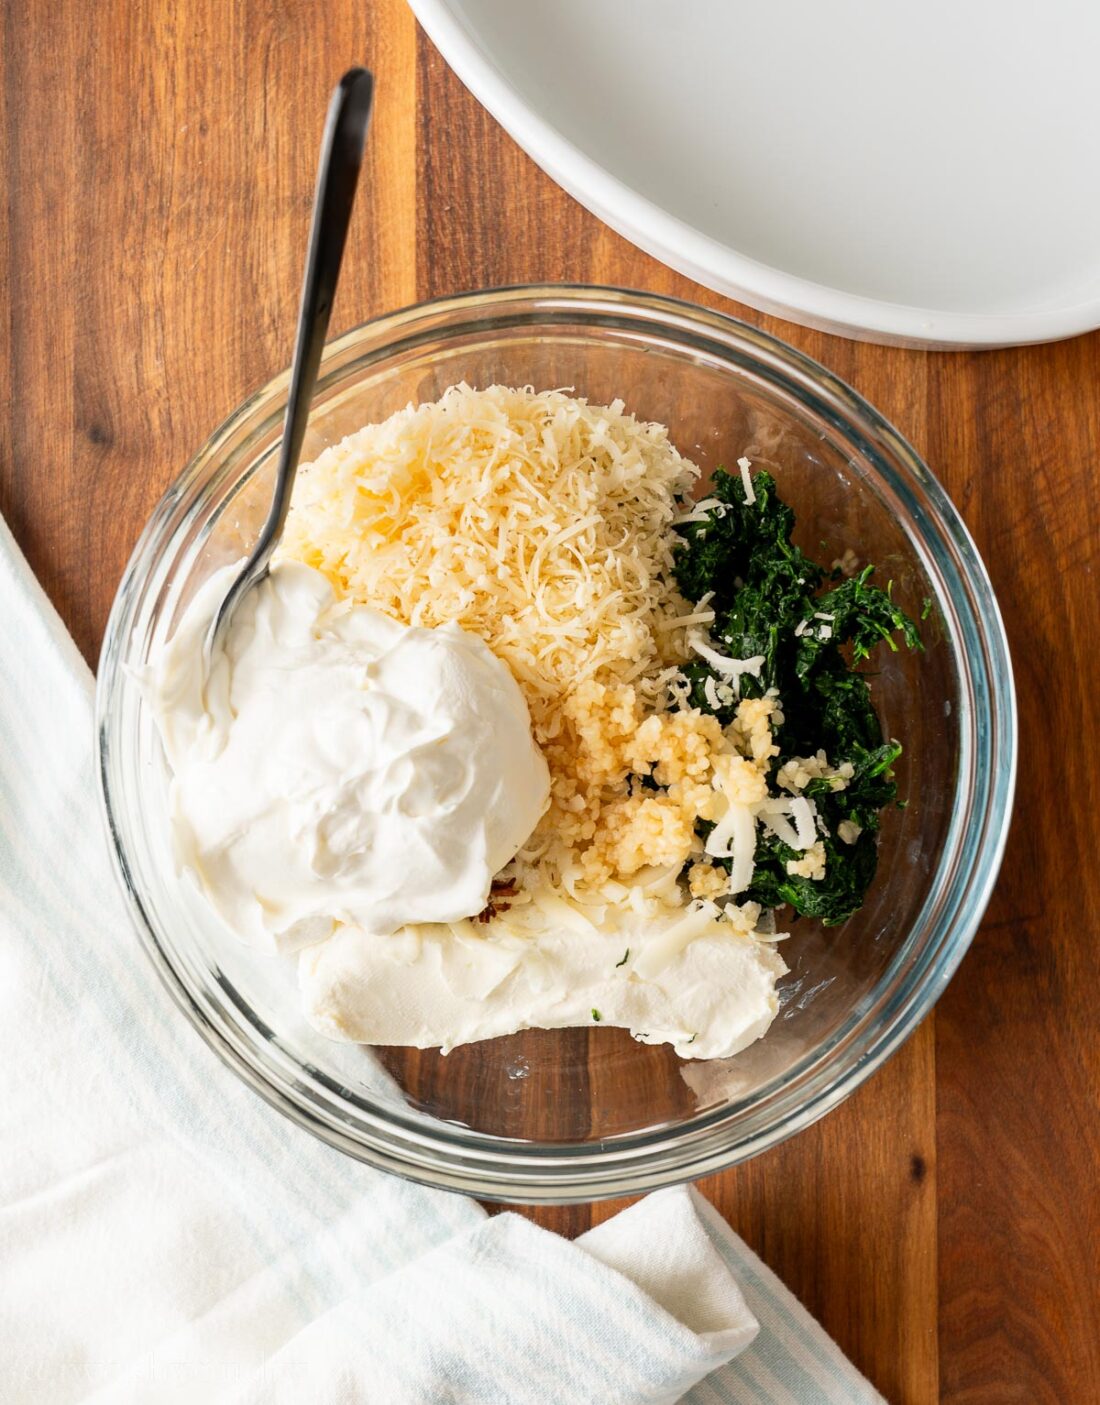 Cream cheese, sour cream and spinach in a glass bowl with mozzarella cheese and garlic.